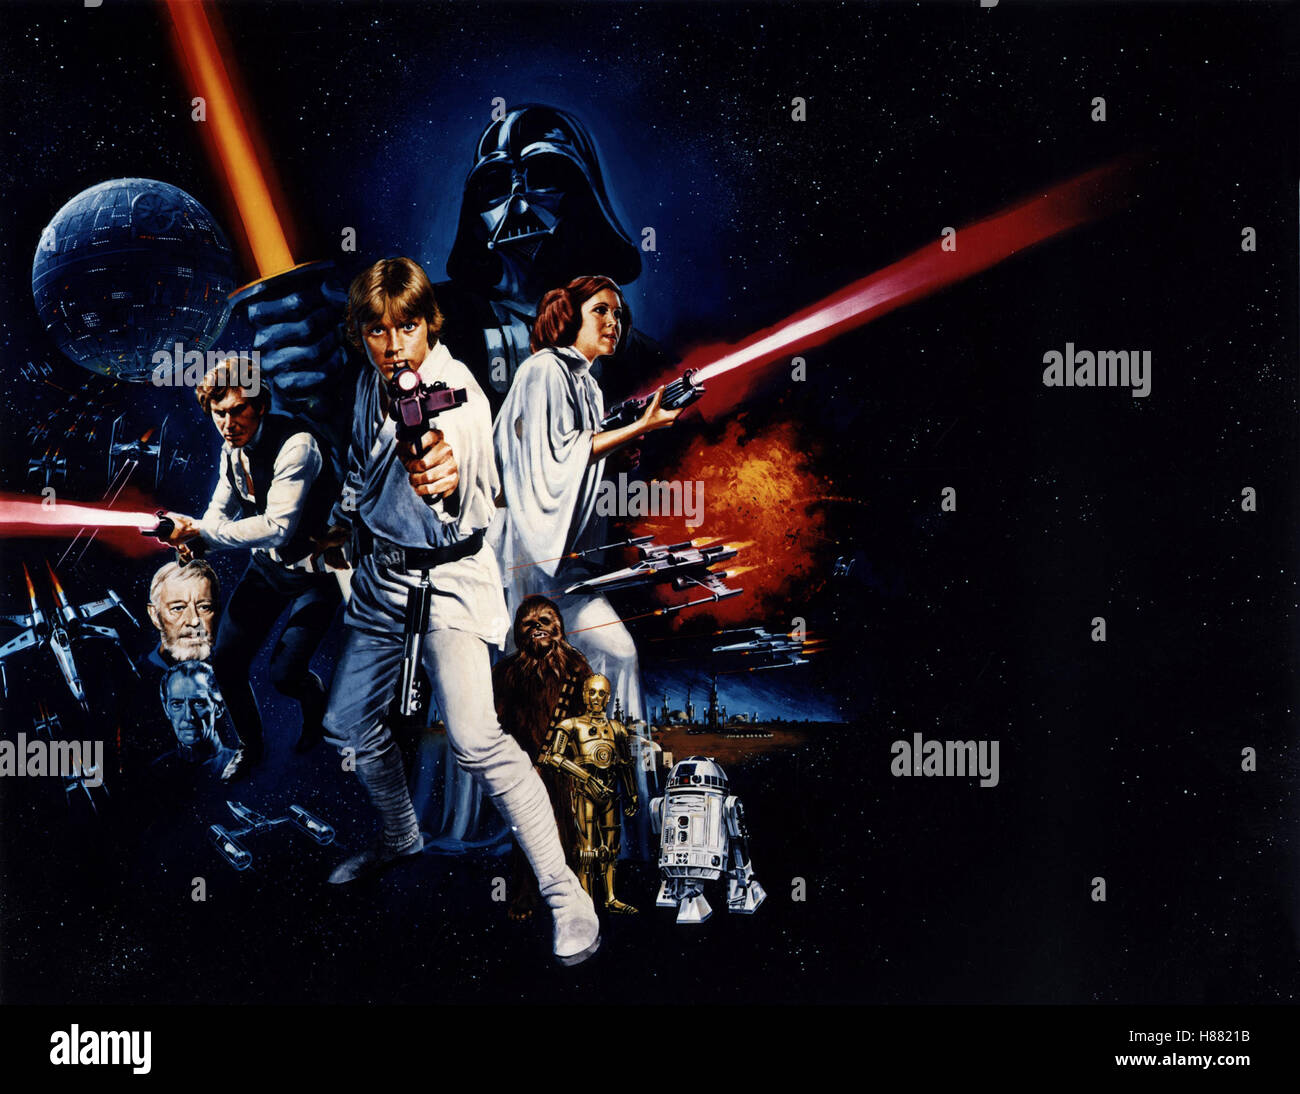 Vintage Movie Poster Star Wars: 'Revenge of the Jedi', 1982 Starring Mark  Hamill, Harrison Ford and Carrie Fisher-1 - Rare Collectibles TV